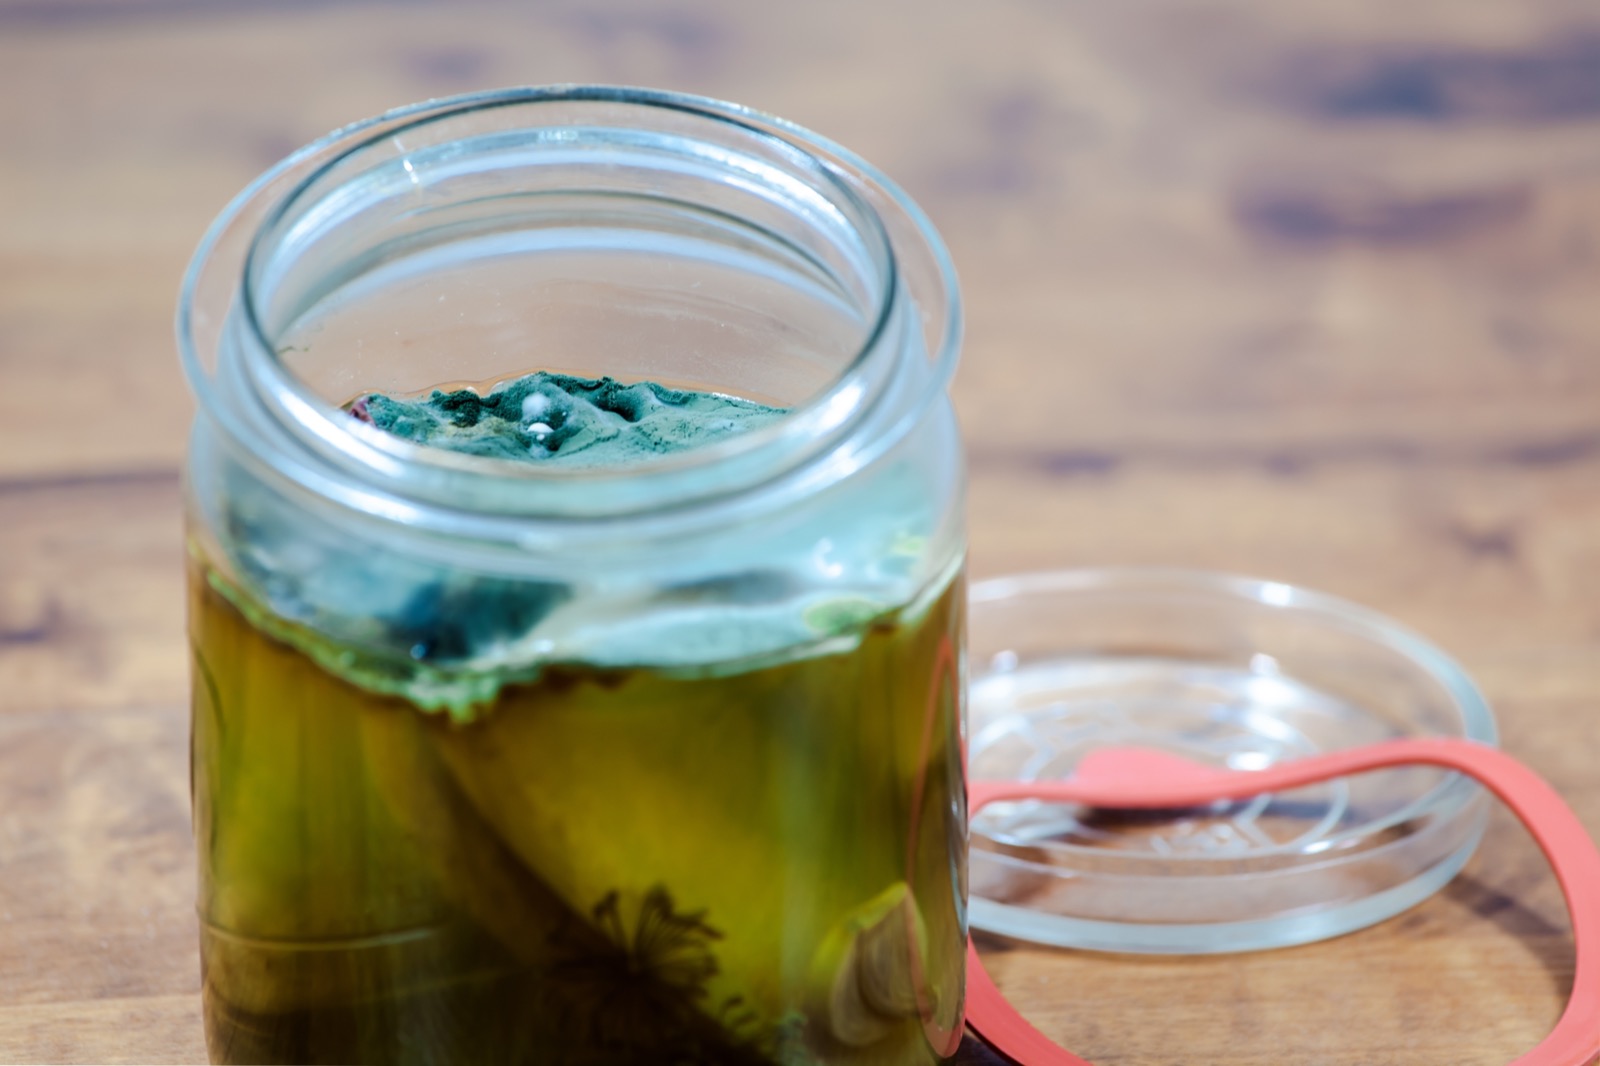 A jar of pickles with a fuzzy blue-green film with occasional fuzzy white dots that lays over the liquid.